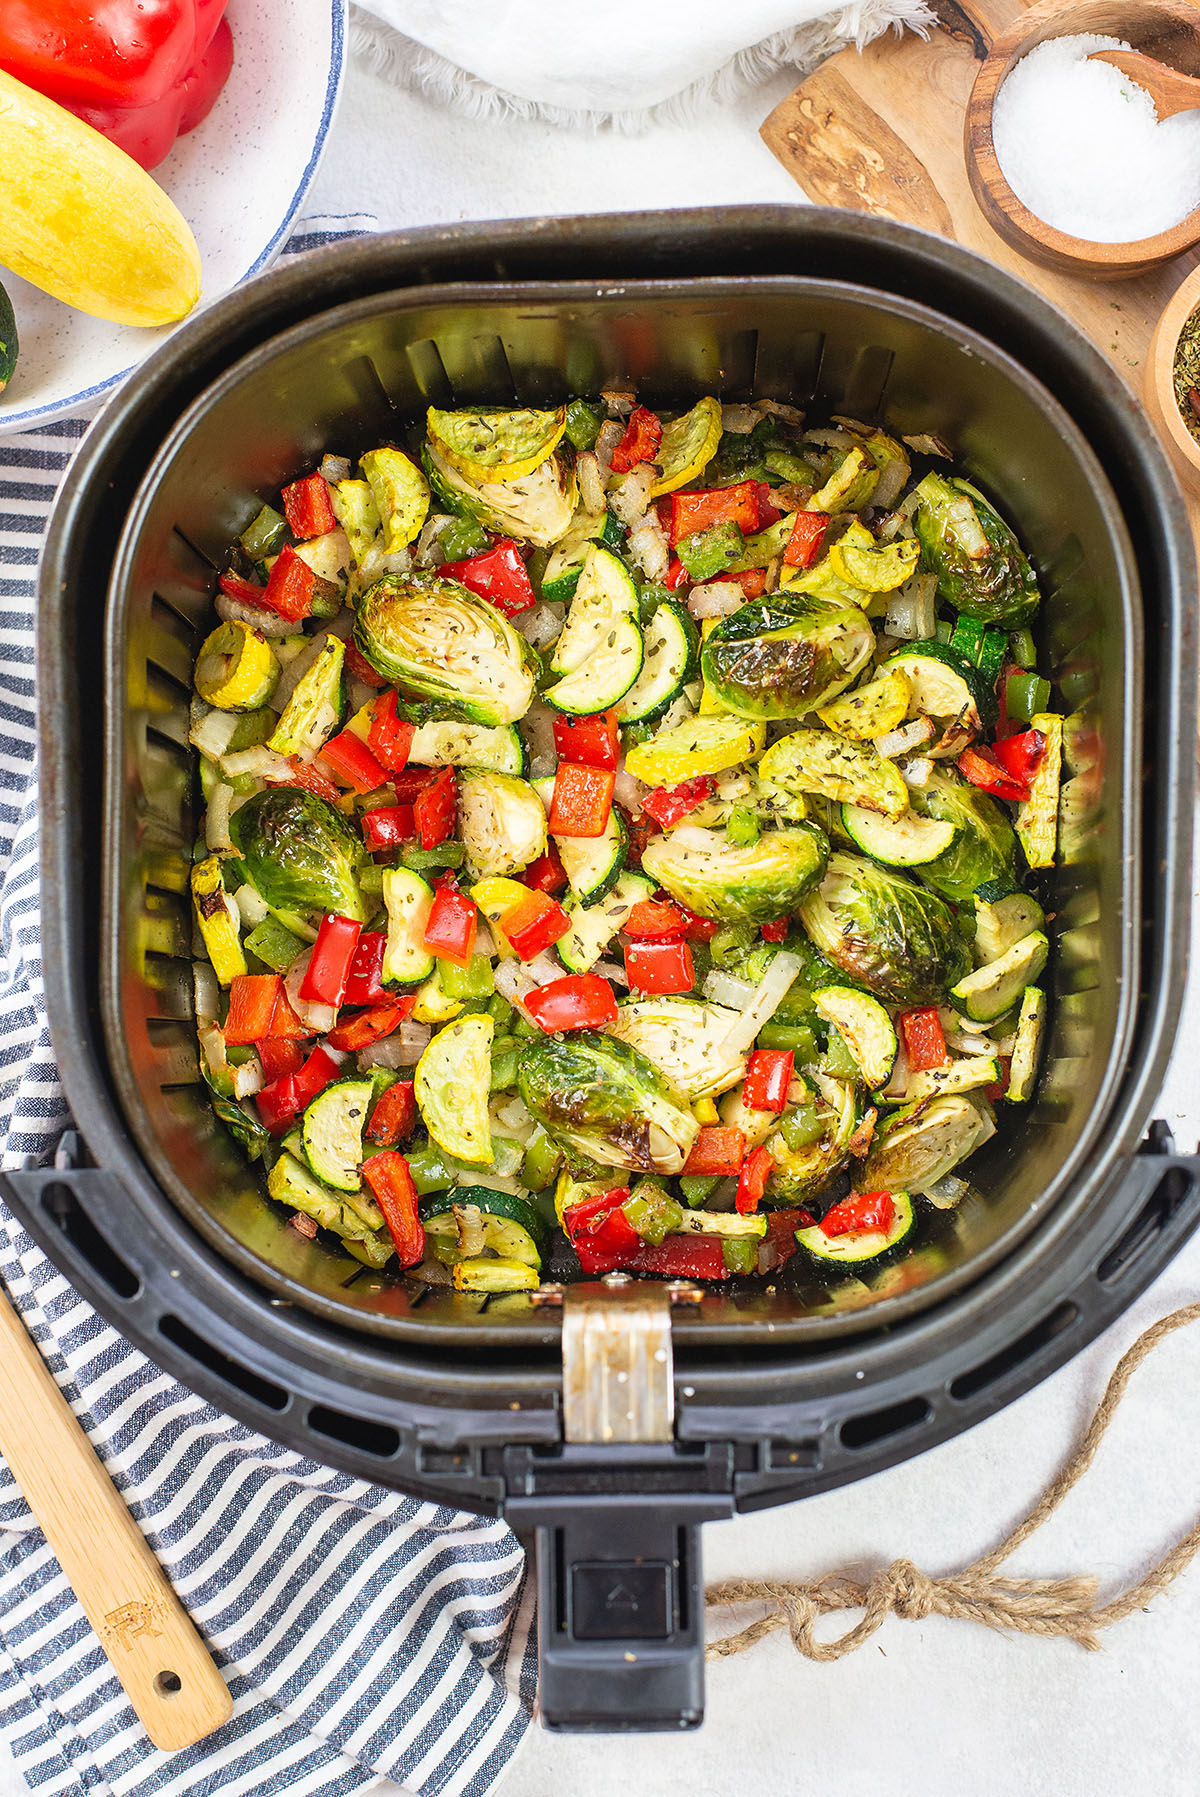 Overhead view of an air fryer basket full of air fried vegetables surrounded by vegetables.